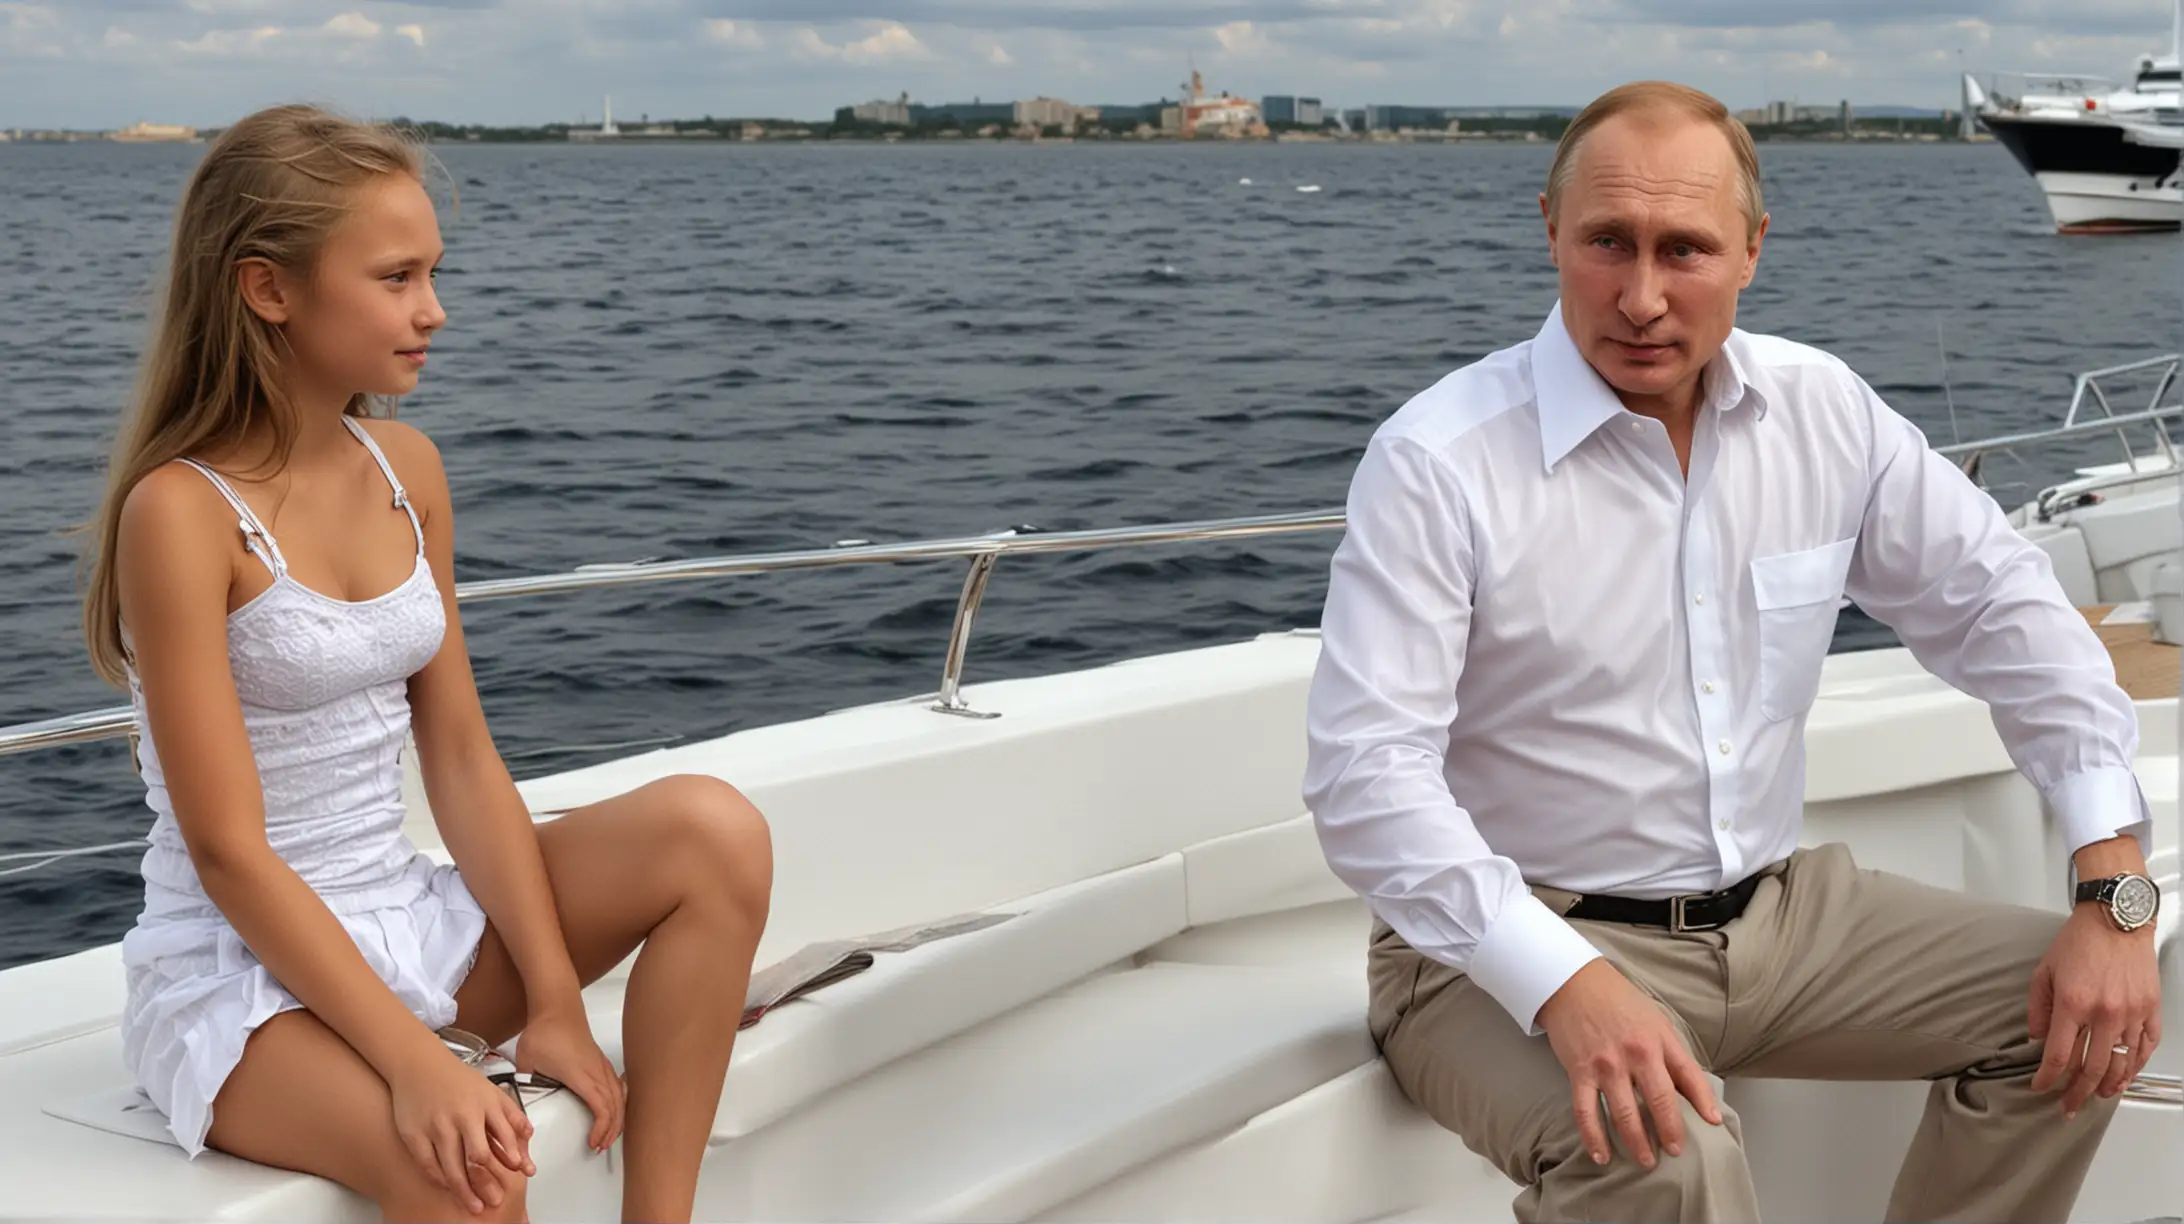 Vladimir Putin Relaxing on Luxury Yacht with a Companion